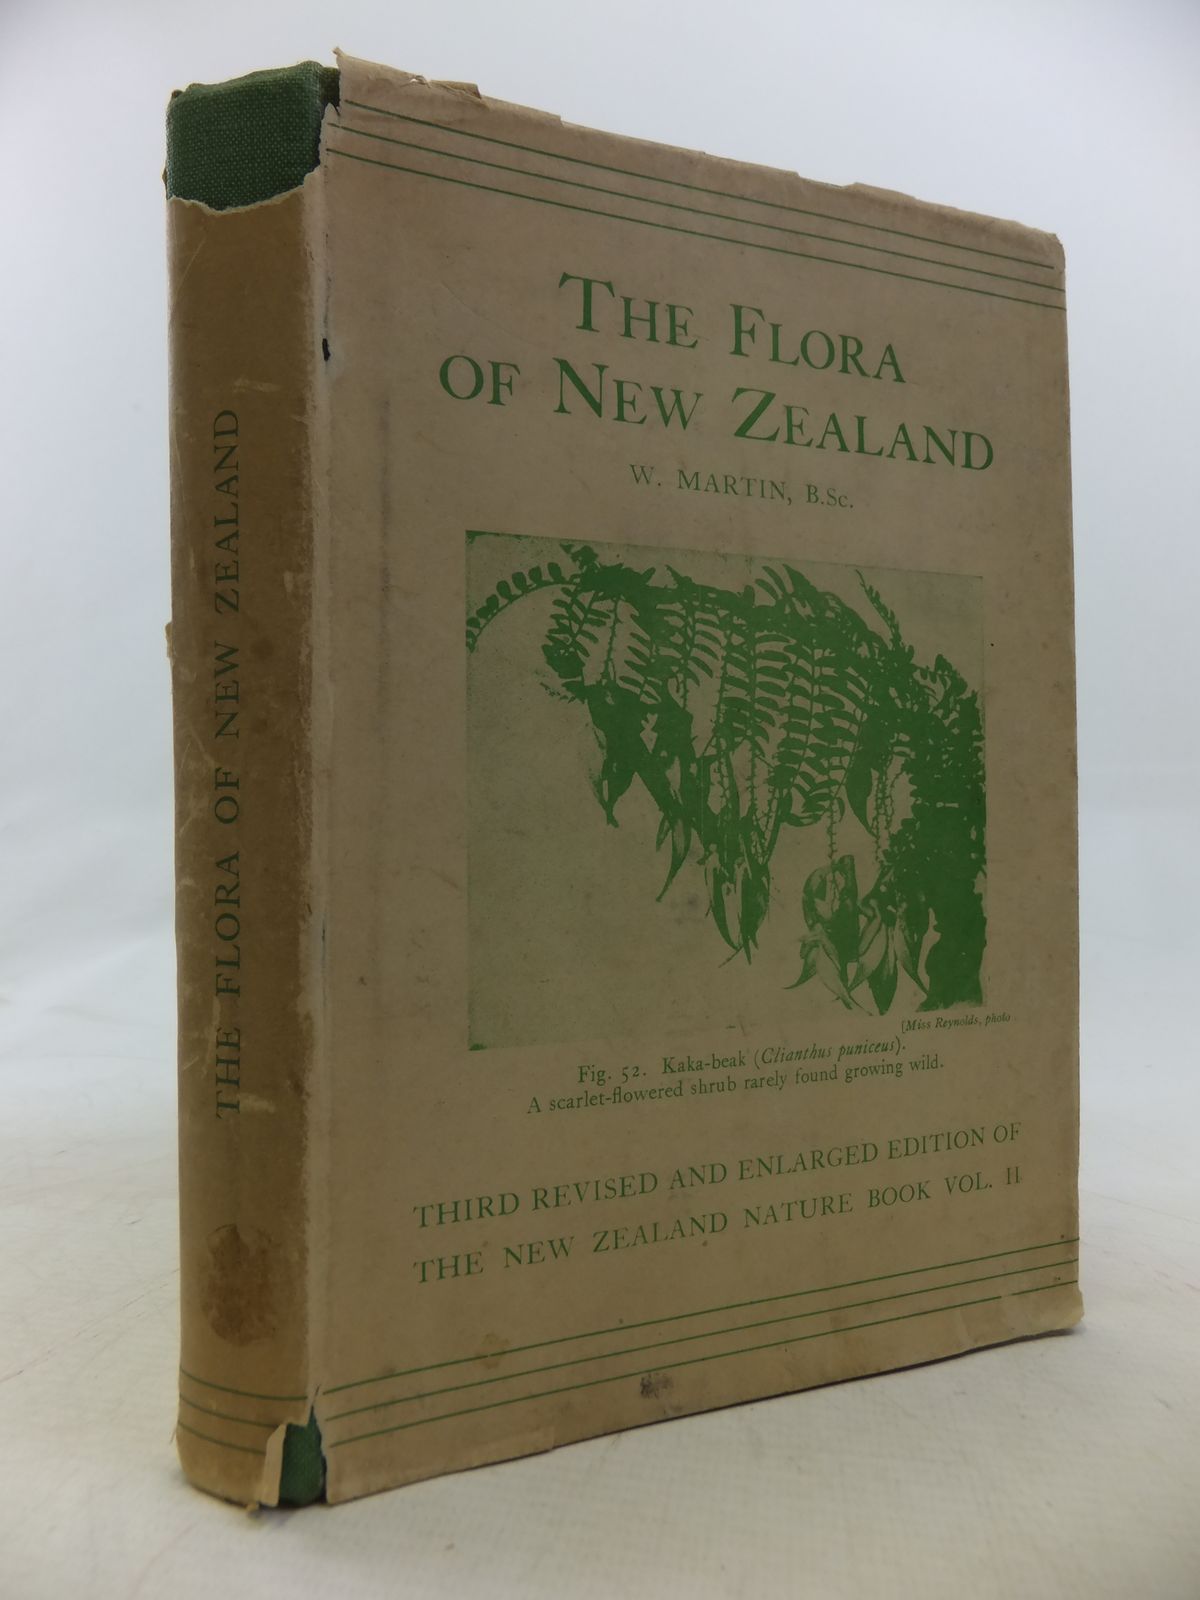 Photo of THE FLORA OF NEW ZEALAND written by Martin, W. published by Whitcombe and Tombs (STOCK CODE: 1809278)  for sale by Stella & Rose's Books